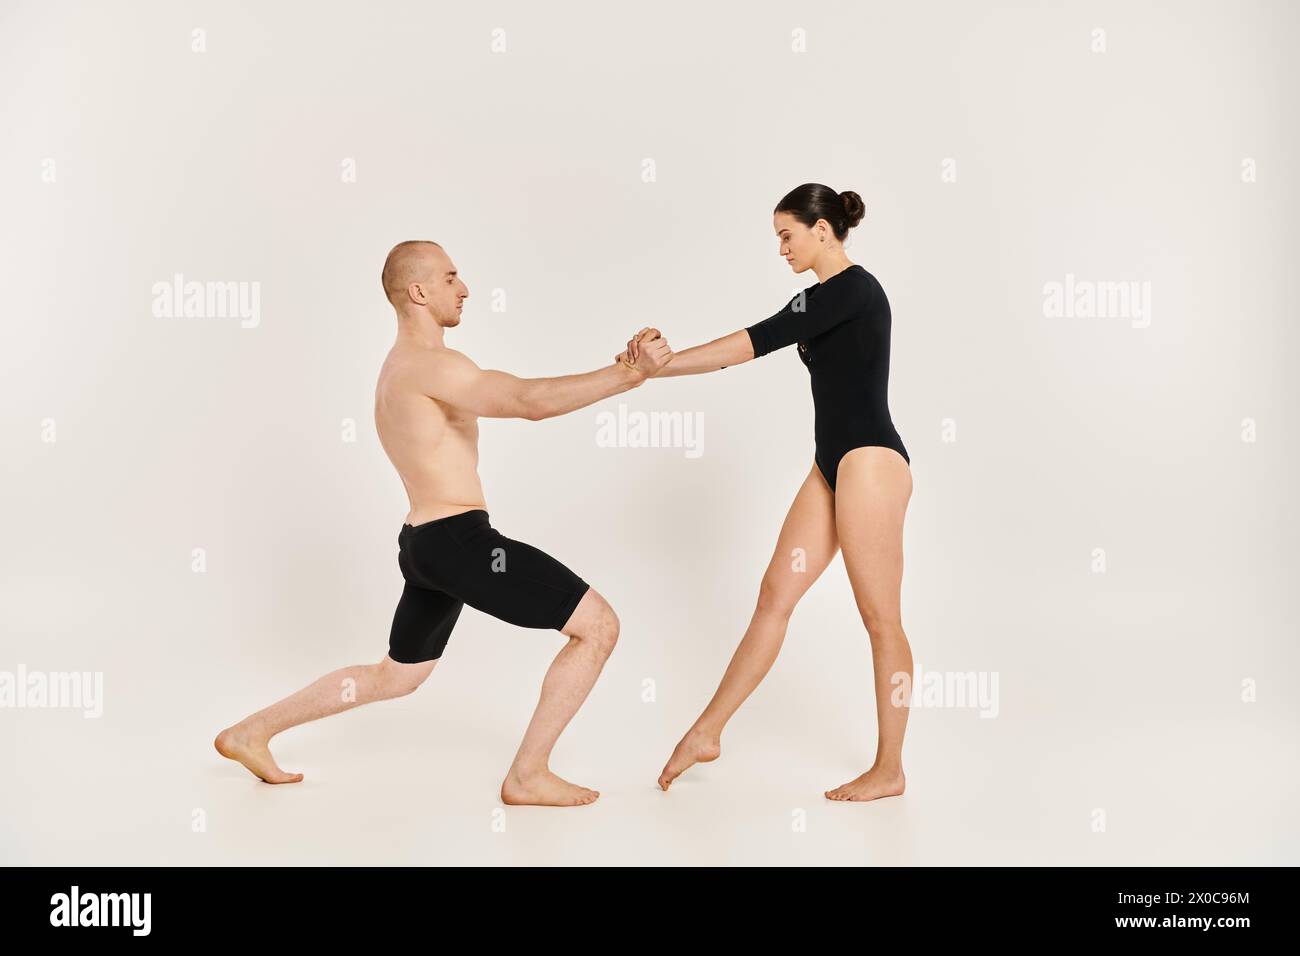 An acrobatic young man and woman elegantly dance together in a studio, showcasing their graceful movements. Stock Photo